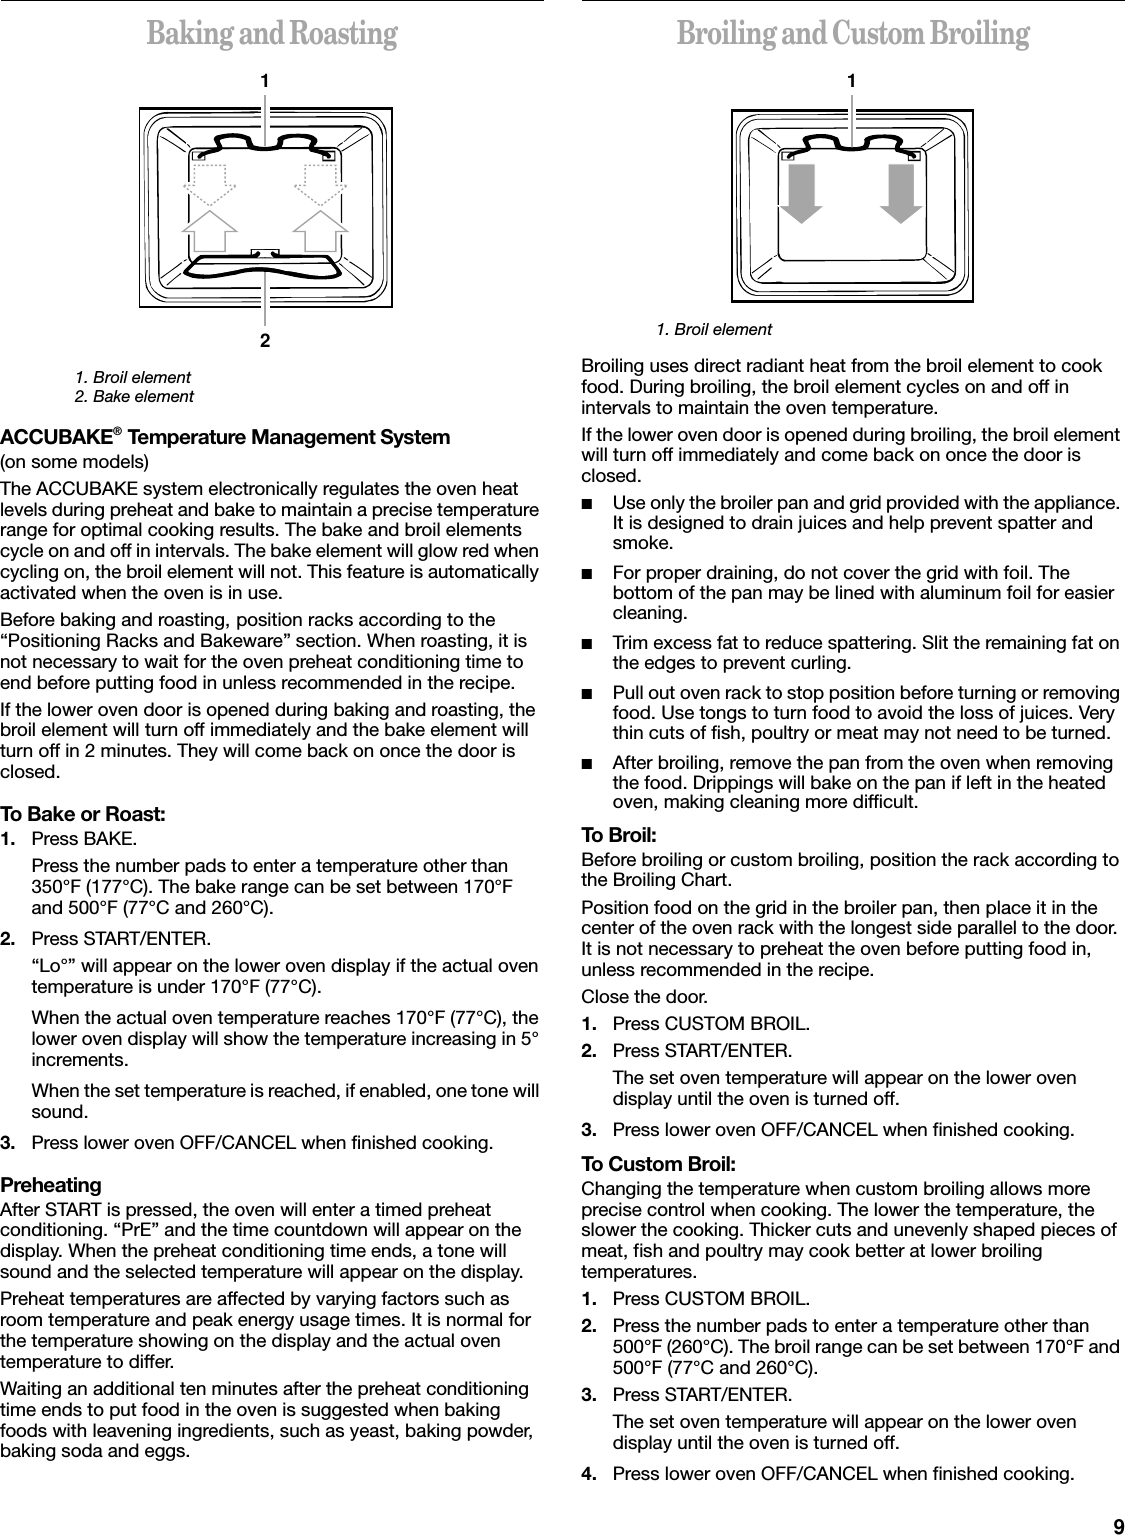 9Baking and Roasting1. Broil element2. Bake elementACCUBAKE® Temperature Management System(on some models)The ACCUBAKE system electronically regulates the oven heat levels during preheat and bake to maintain a precise temperature range for optimal cooking results. The bake and broil elements cycle on and off in intervals. The bake element will glow red when cycling on, the broil element will not. This feature is automatically activated when the oven is in use.Before baking and roasting, position racks according to the “Positioning Racks and Bakeware” section. When roasting, it is not necessary to wait for the oven preheat conditioning time to end before putting food in unless recommended in the recipe.If the lower oven door is opened during baking and roasting, the broil element will turn off immediately and the bake element will turn off in 2 minutes. They will come back on once the door is closed.To Bake or Roast:1. Press BAKE.Press the number pads to enter a temperature other than 350°F (177°C). The bake range can be set between 170°F and 500°F (77°C and 260°C).2. Press START/ENTER.“Lo°” will appear on the lower oven display if the actual oven temperature is under 170°F (77°C).When the actual oven temperature reaches 170°F (77°C), the lower oven display will show the temperature increasing in 5° increments.When the set temperature is reached, if enabled, one tone will sound.3. Press lower oven OFF/CANCEL when finished cooking.PreheatingAfter START is pressed, the oven will enter a timed preheat conditioning. “PrE” and the time countdown will appear on the display. When the preheat conditioning time ends, a tone will sound and the selected temperature will appear on the display.Preheat temperatures are affected by varying factors such as room temperature and peak energy usage times. It is normal for the temperature showing on the display and the actual oven temperature to differ.Waiting an additional ten minutes after the preheat conditioning time ends to put food in the oven is suggested when baking foods with leavening ingredients, such as yeast, baking powder, baking soda and eggs.Broiling and Custom Broiling1. Broil elementBroiling uses direct radiant heat from the broil element to cook food. During broiling, the broil element cycles on and off in intervals to maintain the oven temperature.If the lower oven door is opened during broiling, the broil element will turn off immediately and come back on once the door is closed.■Use only the broiler pan and grid provided with the appliance. It is designed to drain juices and help prevent spatter and smoke.■For proper draining, do not cover the grid with foil. The bottom of the pan may be lined with aluminum foil for easier cleaning.■Trim excess fat to reduce spattering. Slit the remaining fat on the edges to prevent curling.■Pull out oven rack to stop position before turning or removing food. Use tongs to turn food to avoid the loss of juices. Very thin cuts of fish, poultry or meat may not need to be turned.■After broiling, remove the pan from the oven when removing the food. Drippings will bake on the pan if left in the heated oven, making cleaning more difficult.To Broil:Before broiling or custom broiling, position the rack according to the Broiling Chart.Position food on the grid in the broiler pan, then place it in the center of the oven rack with the longest side parallel to the door. It is not necessary to preheat the oven before putting food in, unless recommended in the recipe.Close the door.1. Press CUSTOM BROIL.2. Press START/ENTER.The set oven temperature will appear on the lower oven display until the oven is turned off.3. Press lower oven OFF/CANCEL when finished cooking.To Custom Broil:Changing the temperature when custom broiling allows more precise control when cooking. The lower the temperature, the slower the cooking. Thicker cuts and unevenly shaped pieces of meat, fish and poultry may cook better at lower broiling temperatures.1. Press CUSTOM BROIL.2. Press the number pads to enter a temperature other than 500°F (260°C). The broil range can be set between 170°F and 500°F (77°C and 260°C).3. Press START/ENTER.The set oven temperature will appear on the lower oven display until the oven is turned off.4. Press lower oven OFF/CANCEL when finished cooking.121